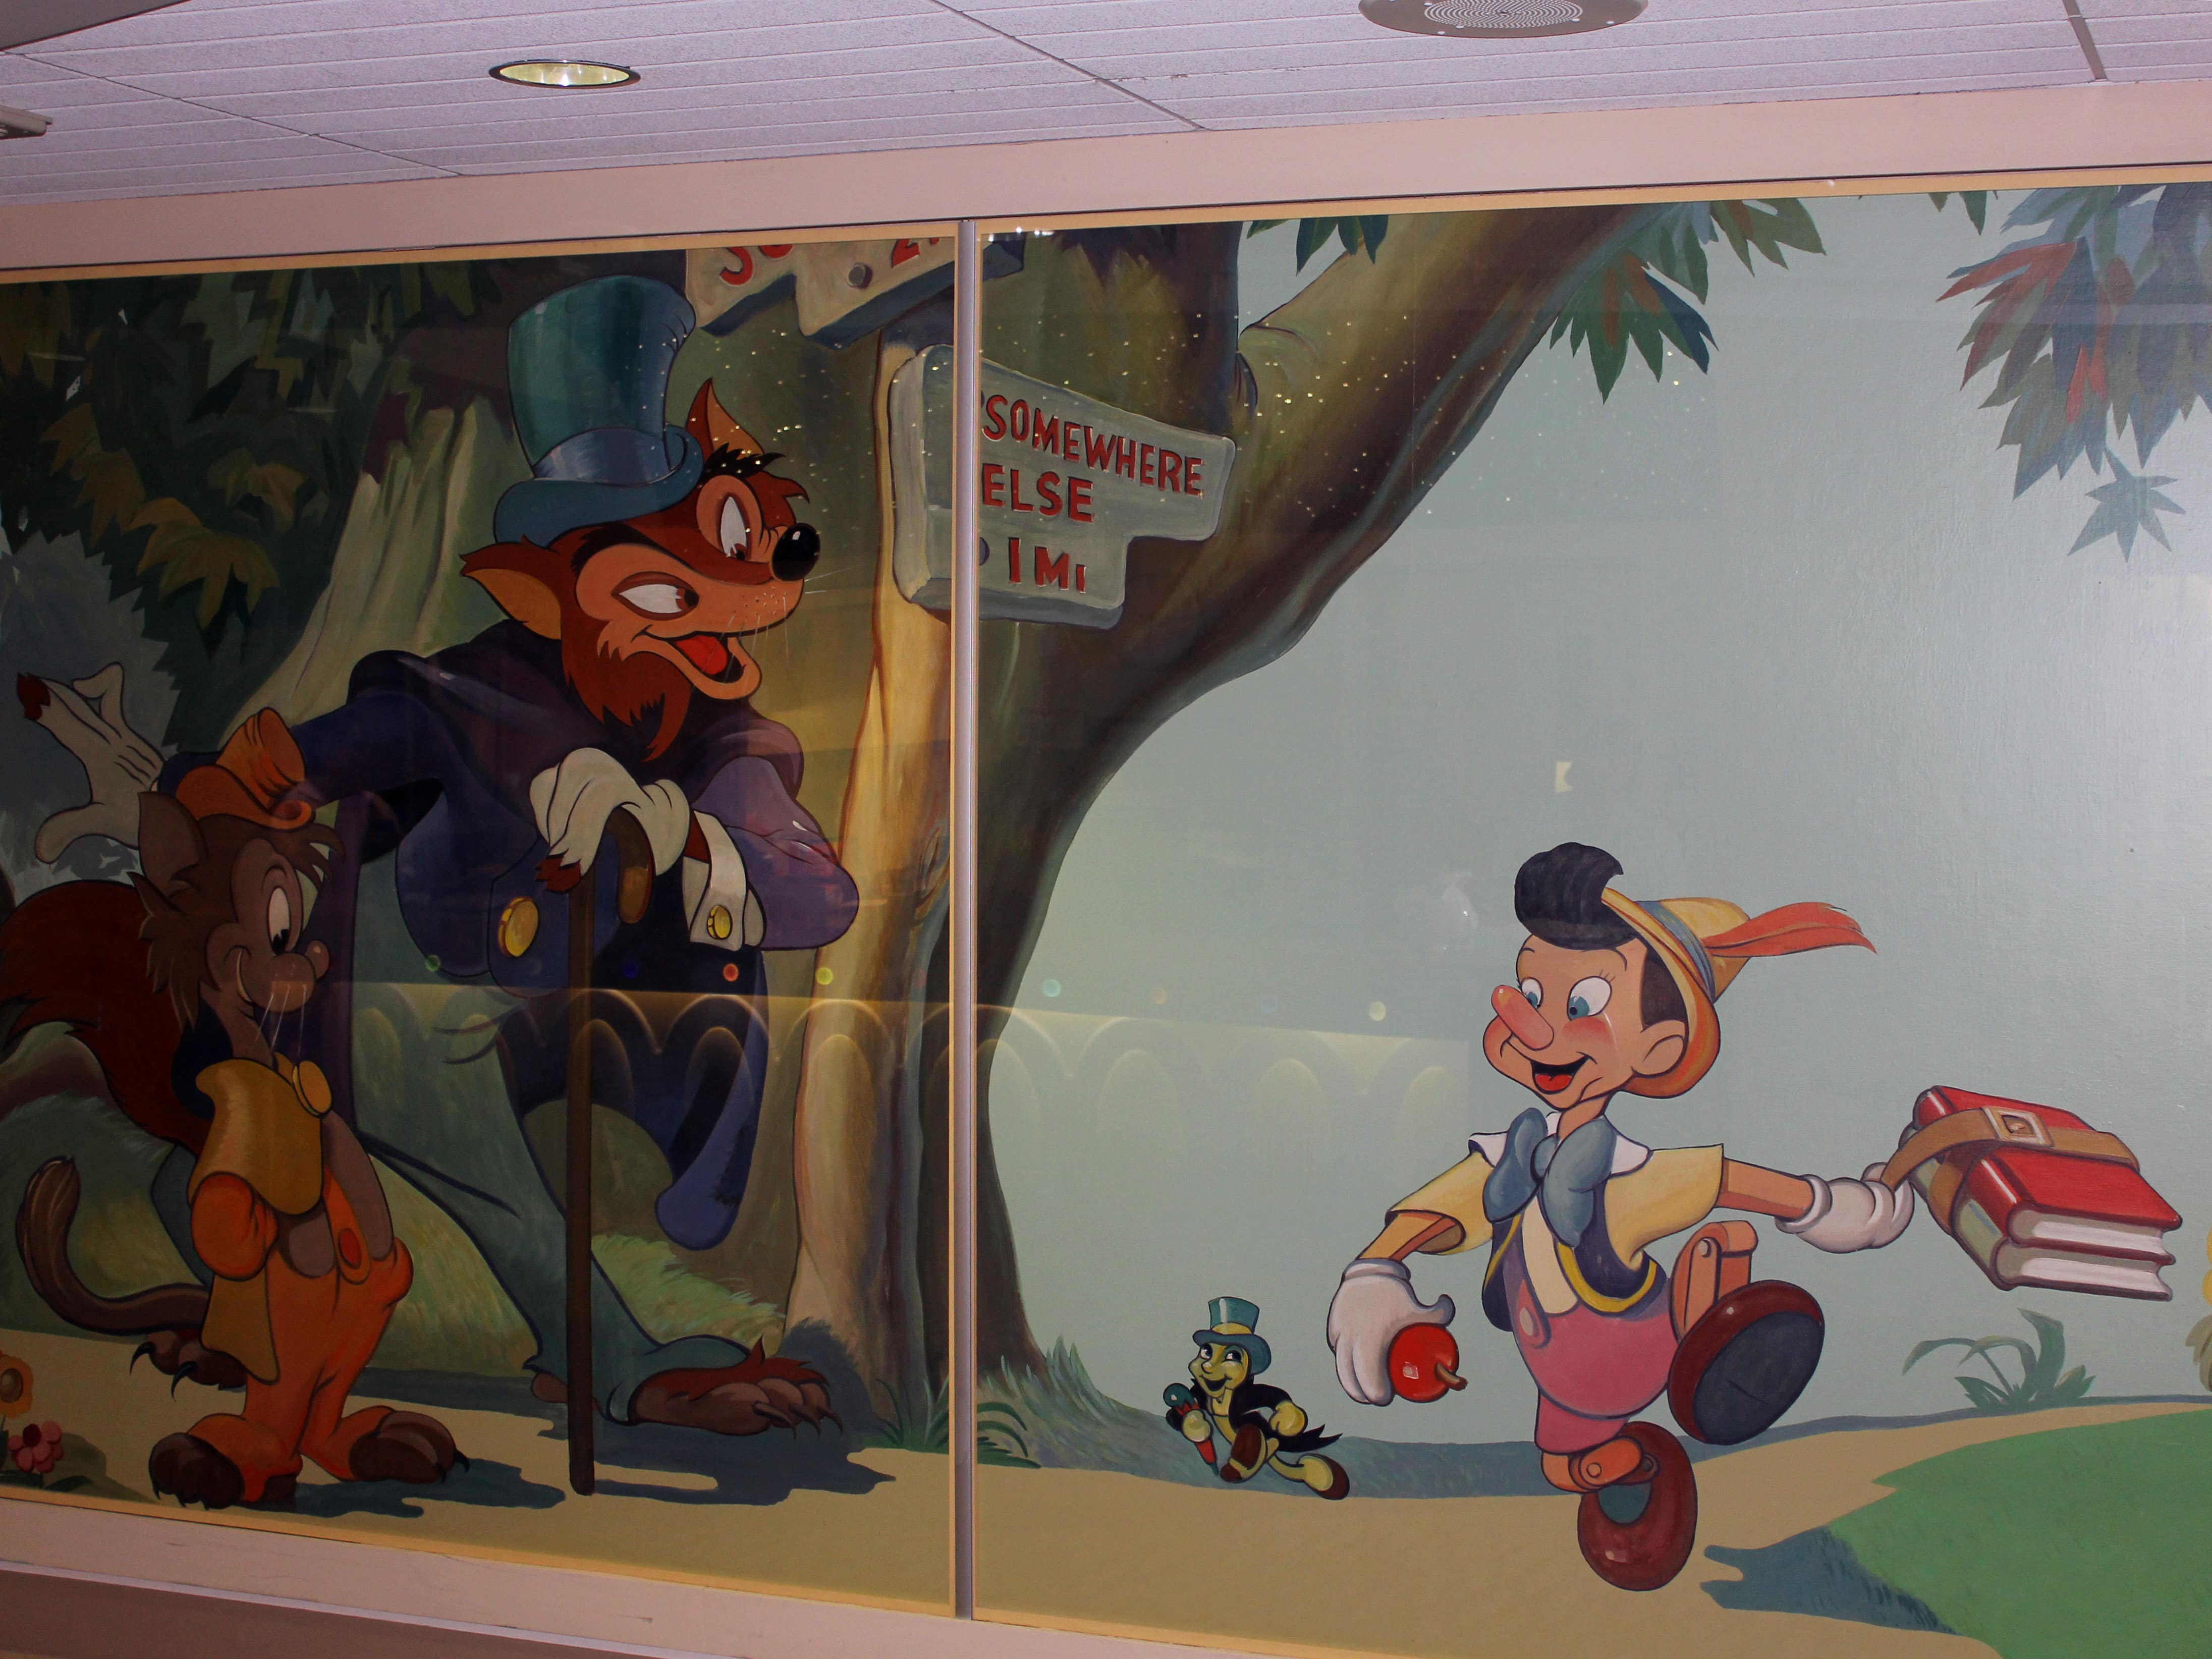 Pinocchio is led astray in this Disney Mural